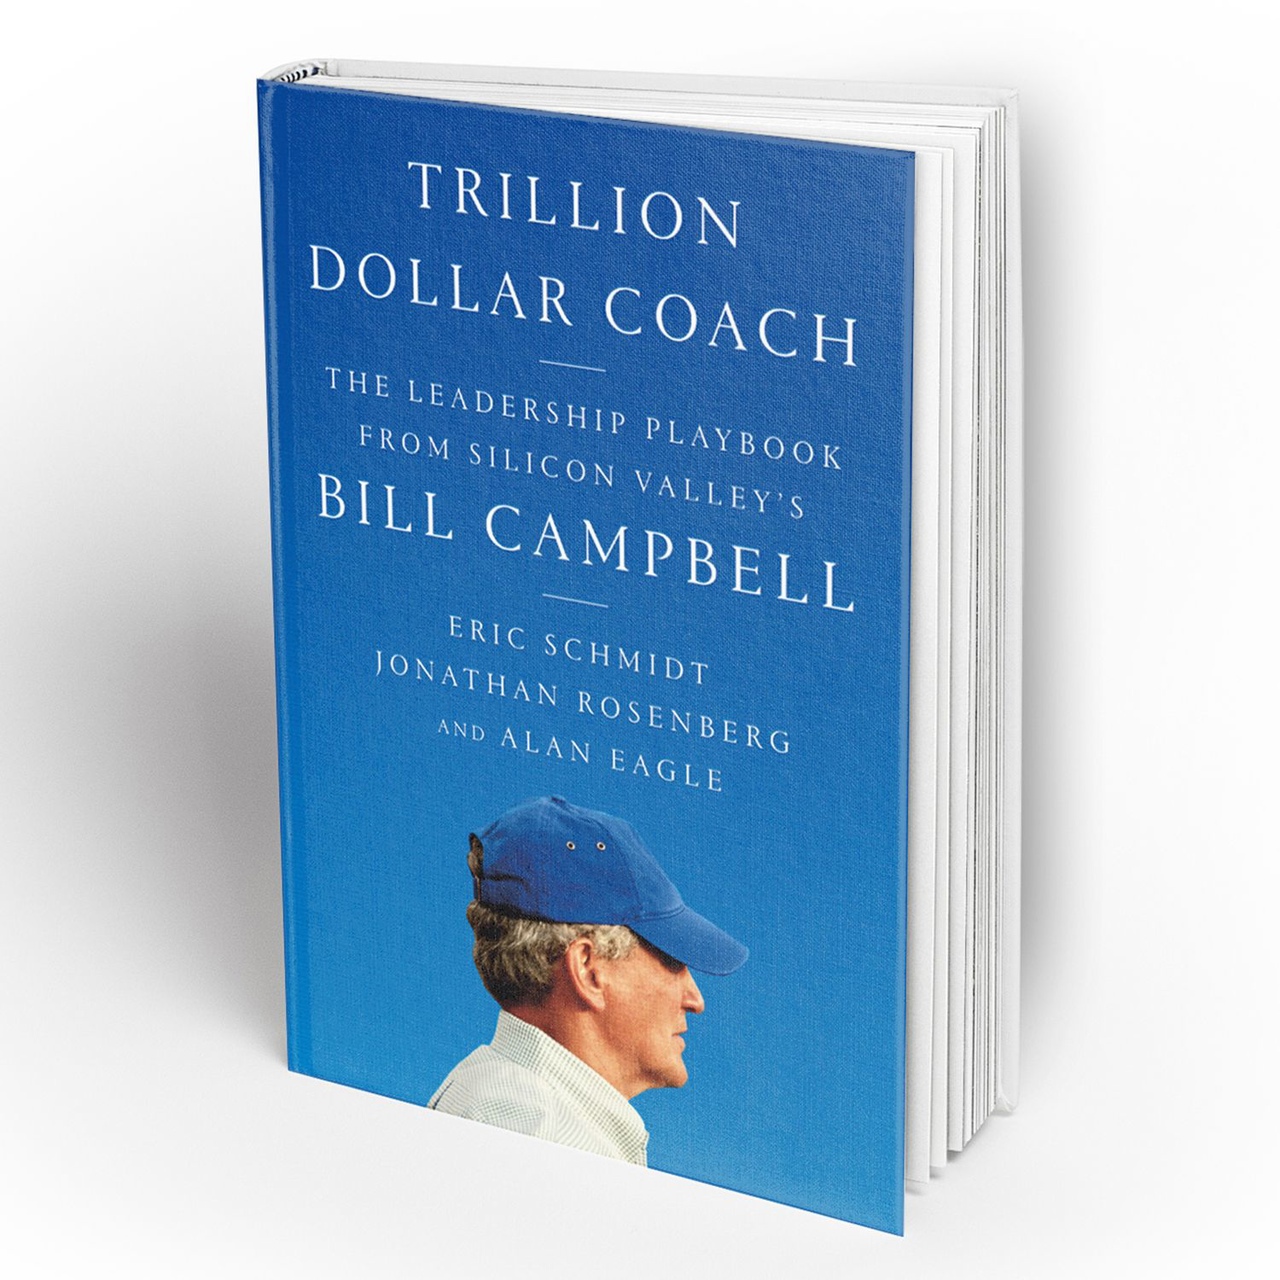 Trillion Dollar Coach: The Leadership Playbook Of Silicon Valley’s Bill Campbell